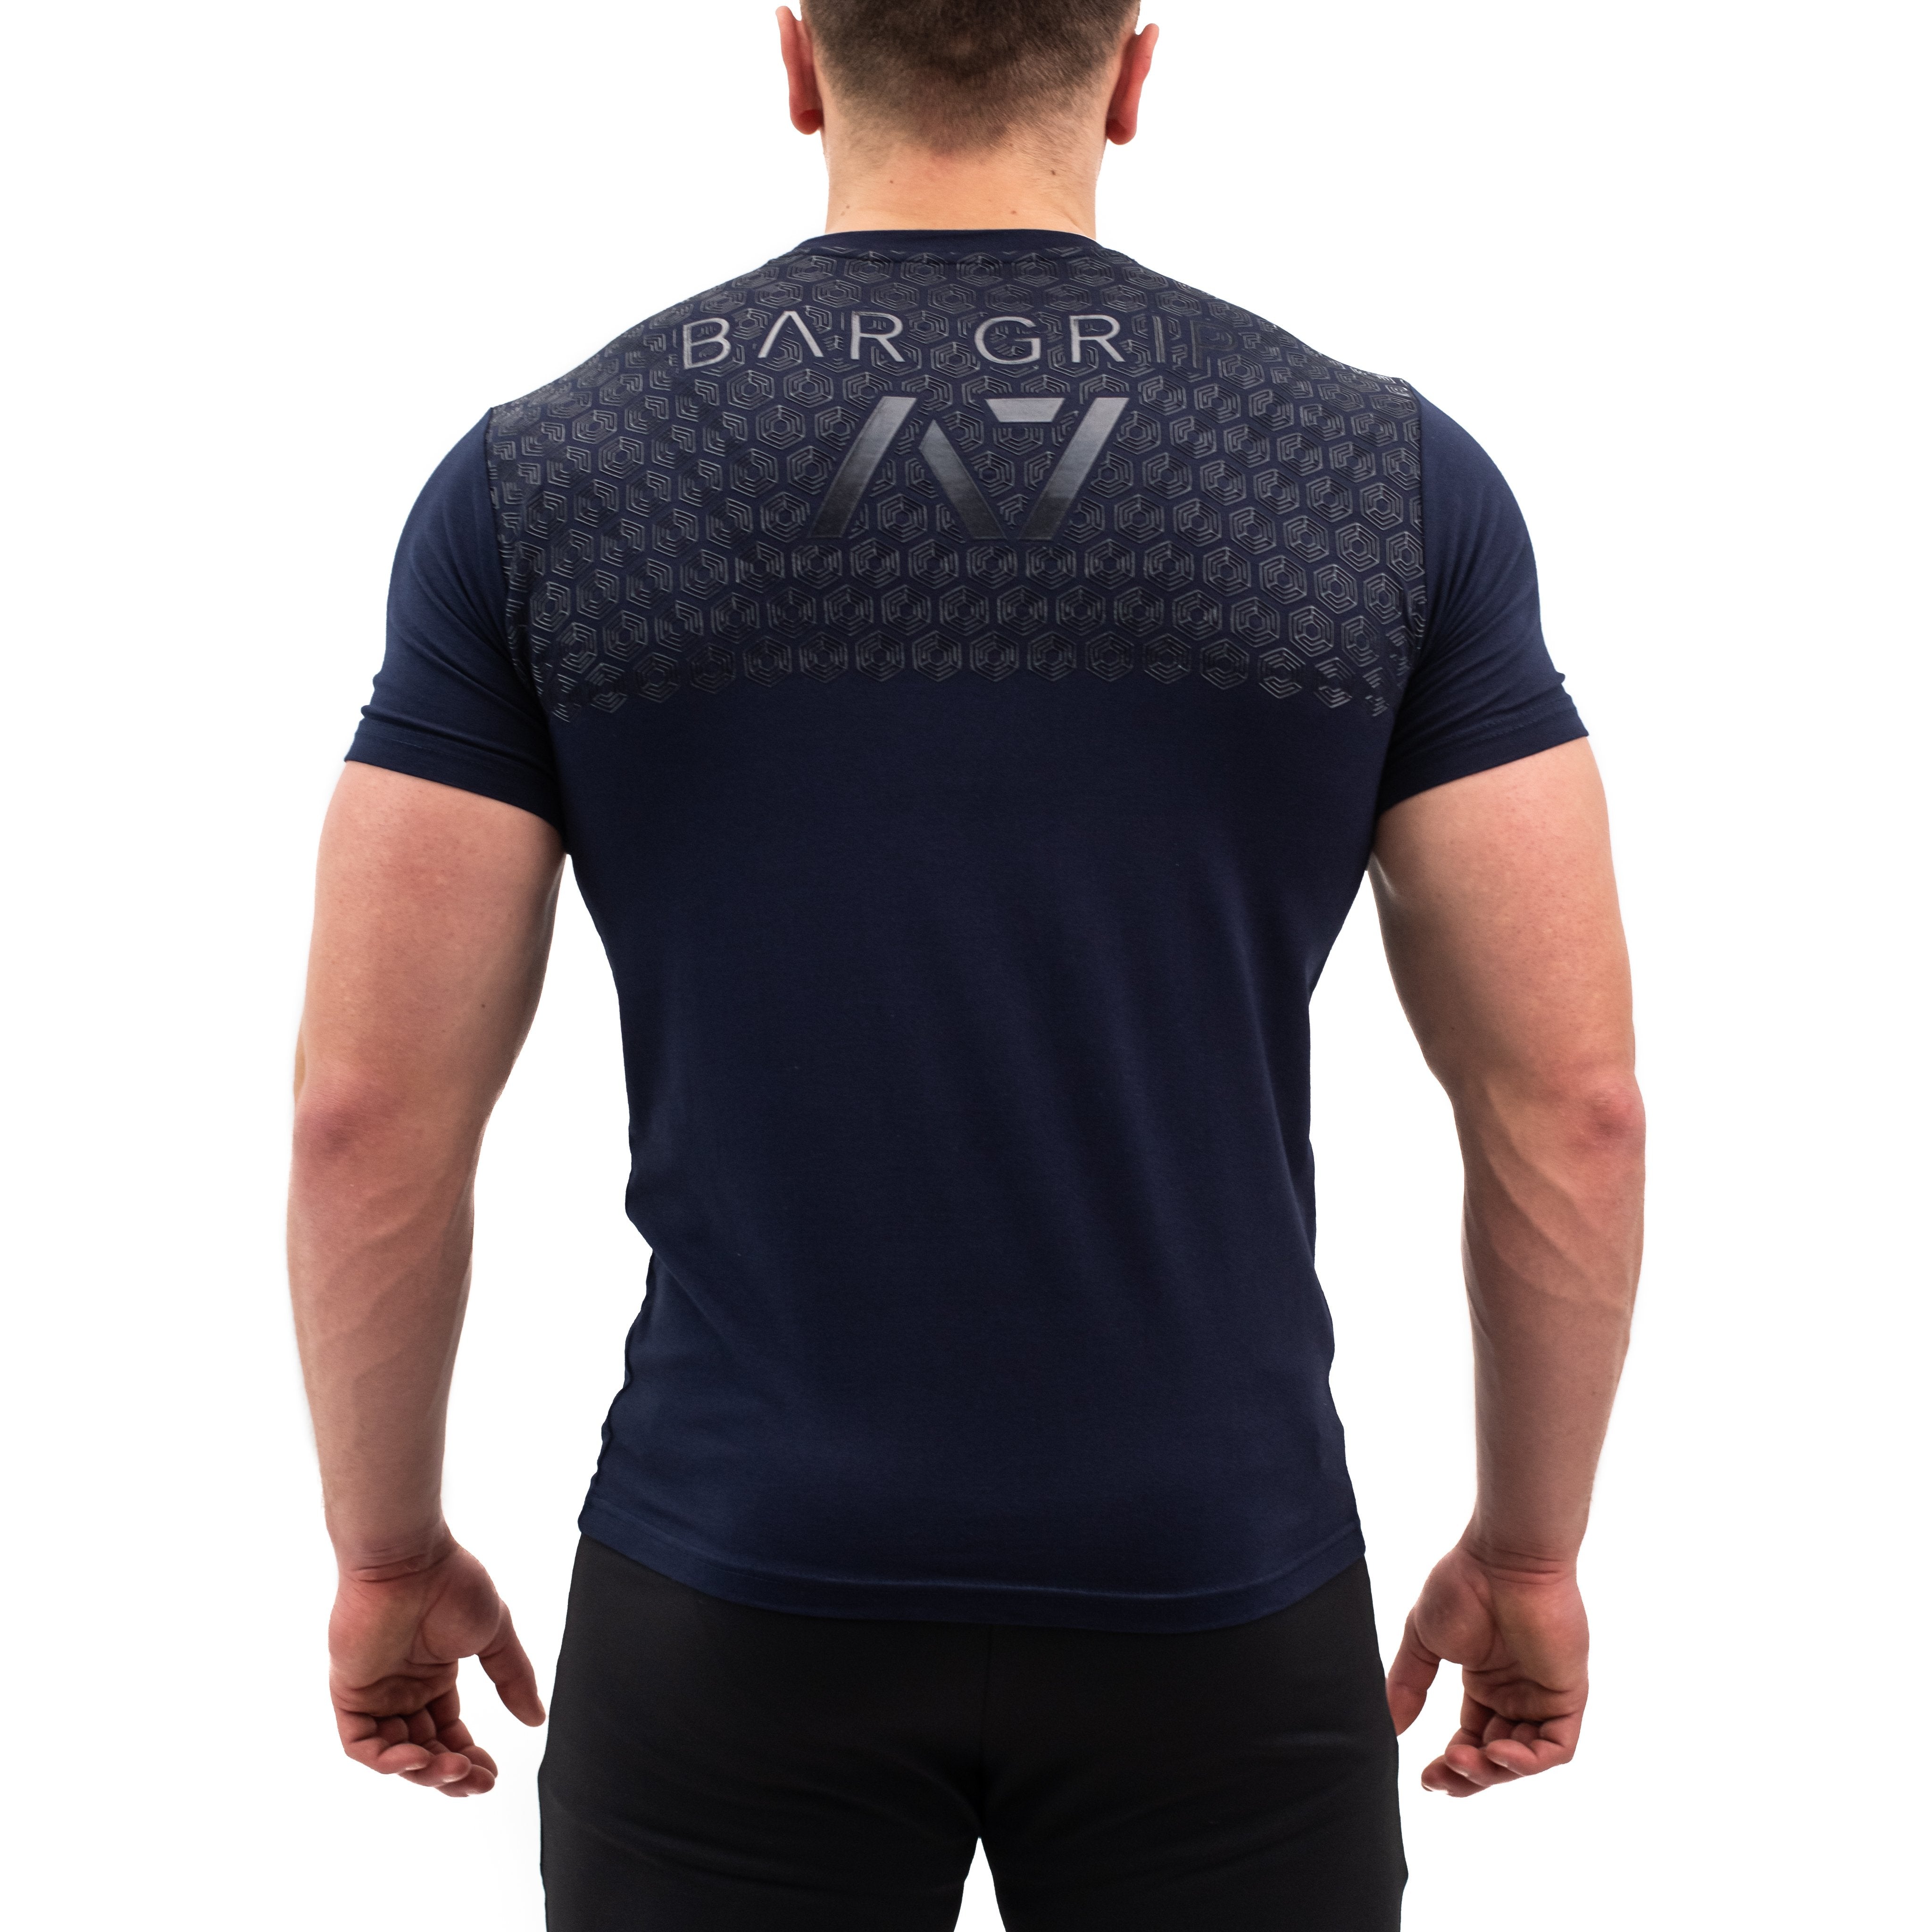 Rift Bar Grip T-shirt, great as a squat shirt. Purchase Rift Bar Grip tshirt UK from A7 UK. Purchase Rift Bar Grip Shirt in Europe from A7 UK. No more chalk and no more sliding. Best Bar Grip Tshirts, shipping to UK and Europe from A7 UK. Rift is our classic black on black shirt design! The best Powerlifting apparel for all your workouts. Available in UK and Europe including France, Italy, Germany, Sweden and Poland